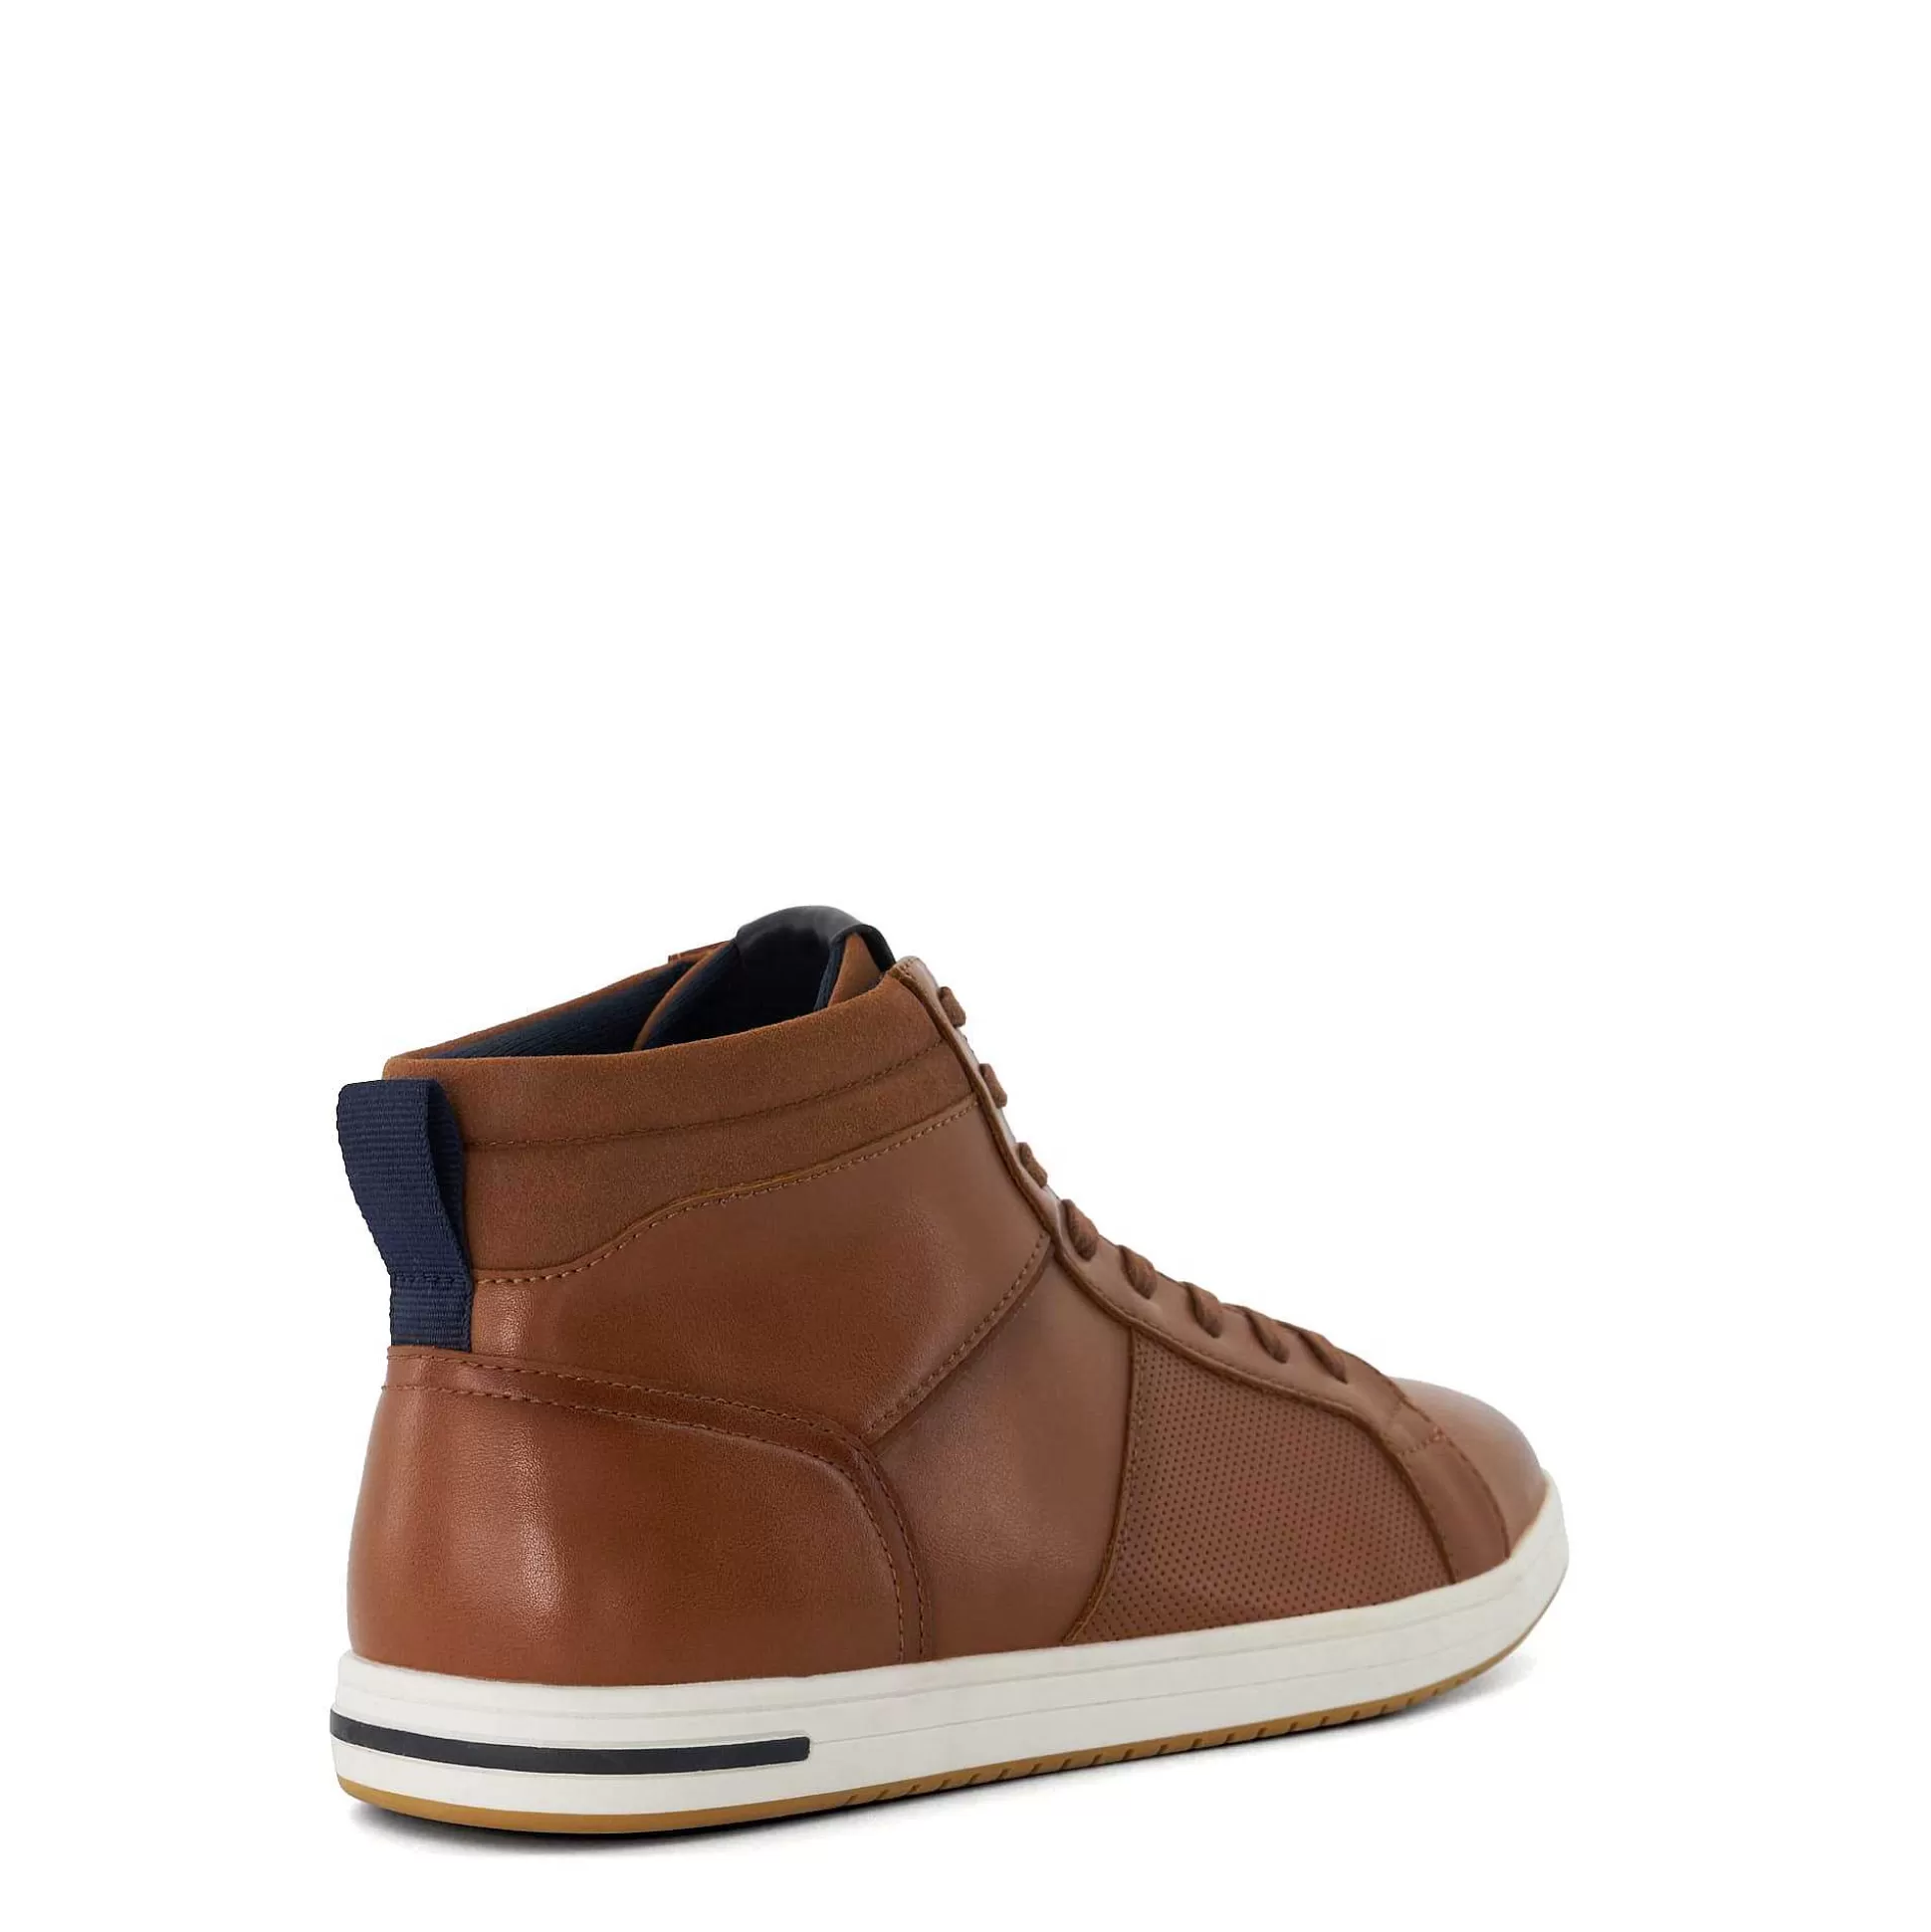 Dune London SEZZY - TAN-Men Casual Shoes | Trainers